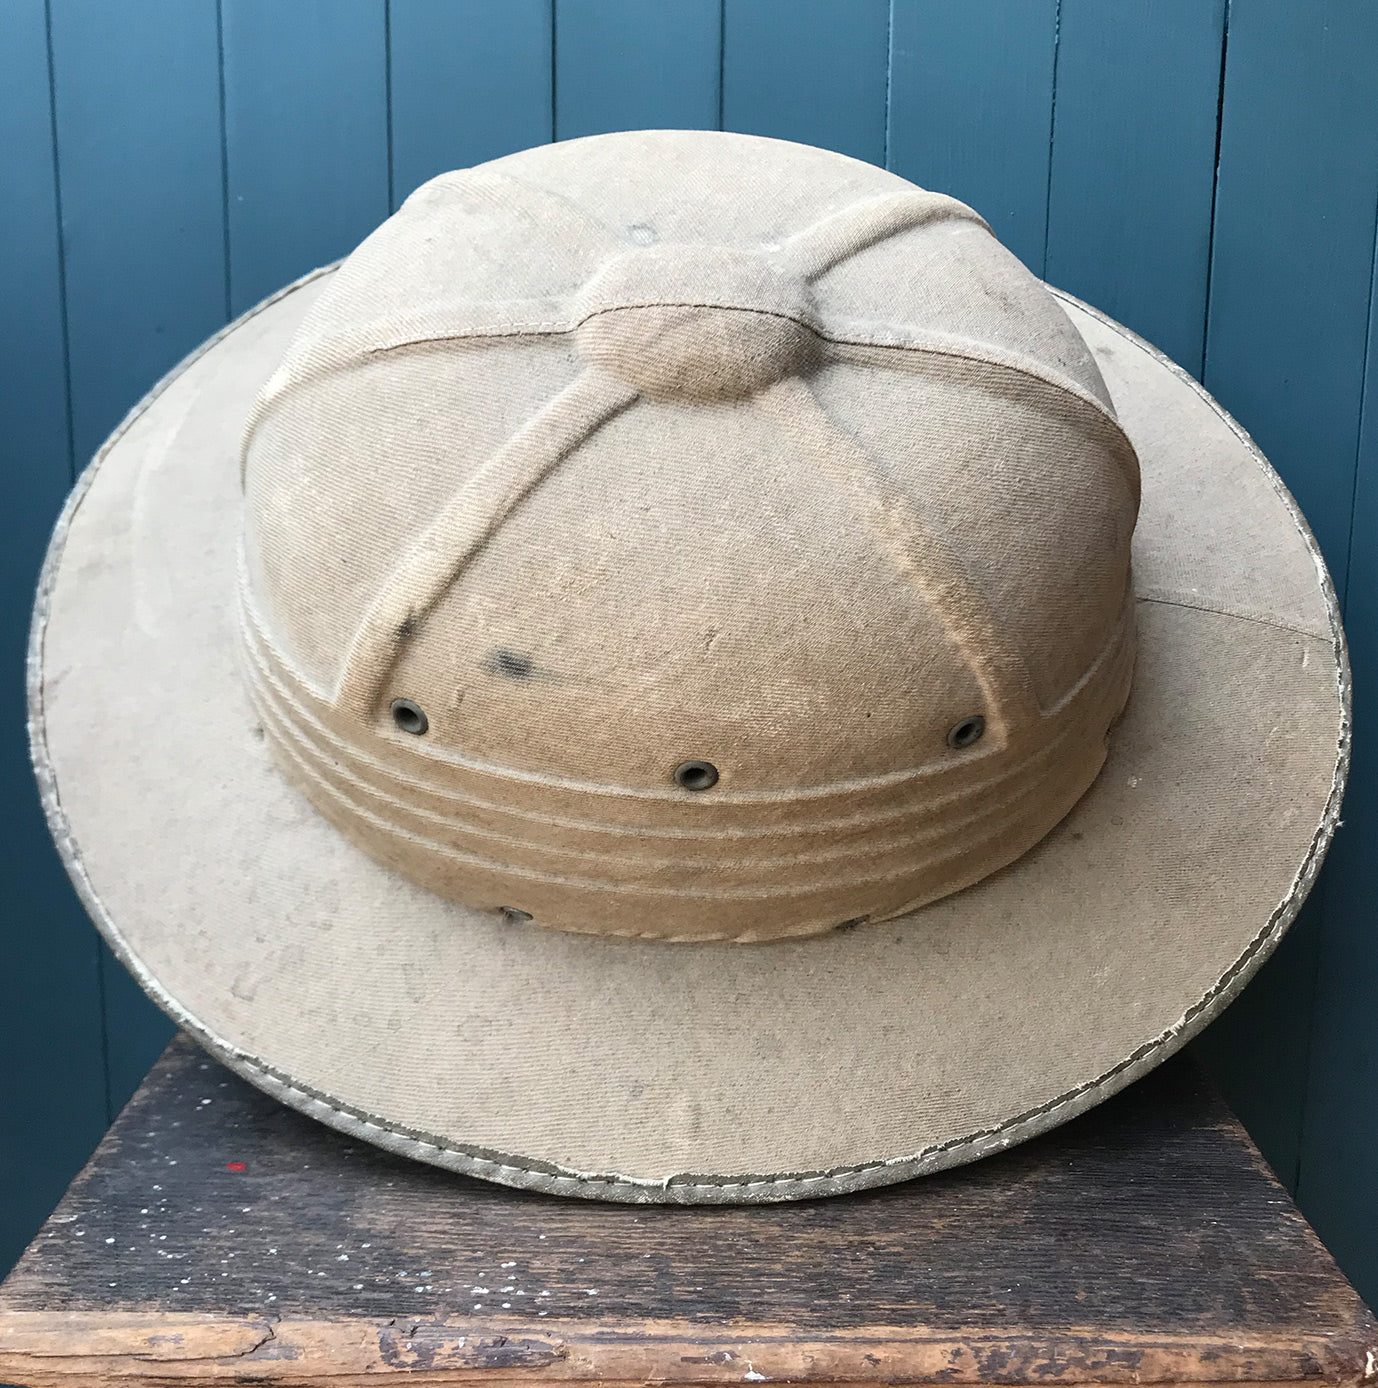 Going on safari? Then you need a Vintage Pith Helmet and Canteen! Made in France the hat is best quality solid cork and covered in canvas and has a fantastically designed inner label with a cool looking lion. The vintage canteen in made of aluminium with a screw top and has a felt studded jacket - SHOP NOW - www.intovintage.co.uk